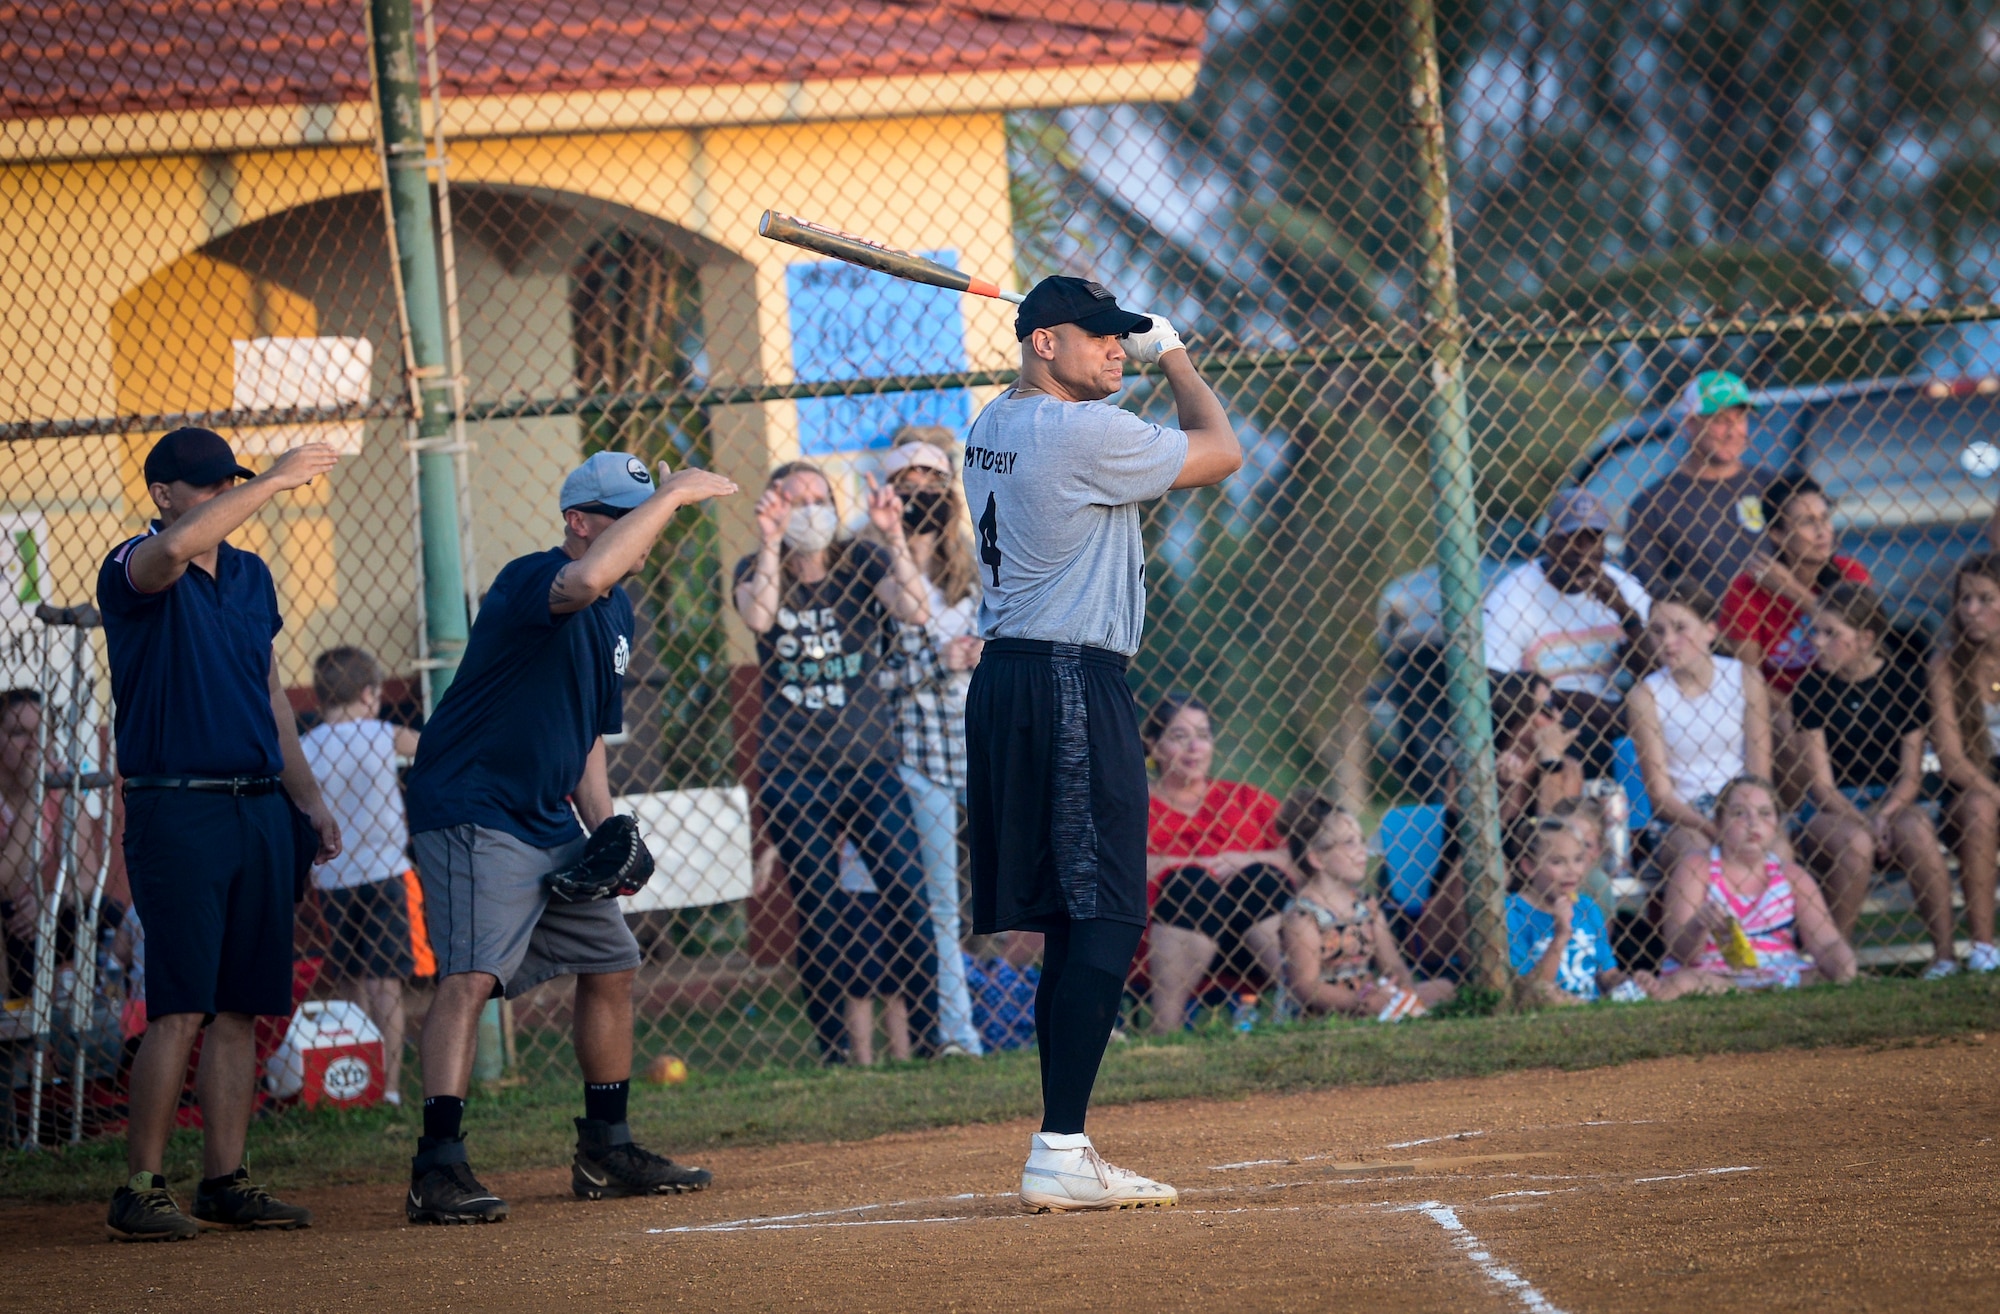 U.S. Air Force Col. Ryan Hendricks, 36th Wing judge advocate, prepares to hit during the Chief’s versus Eagle’s softball game at Andersen Air Force Base, Guam, June 18, 2021.